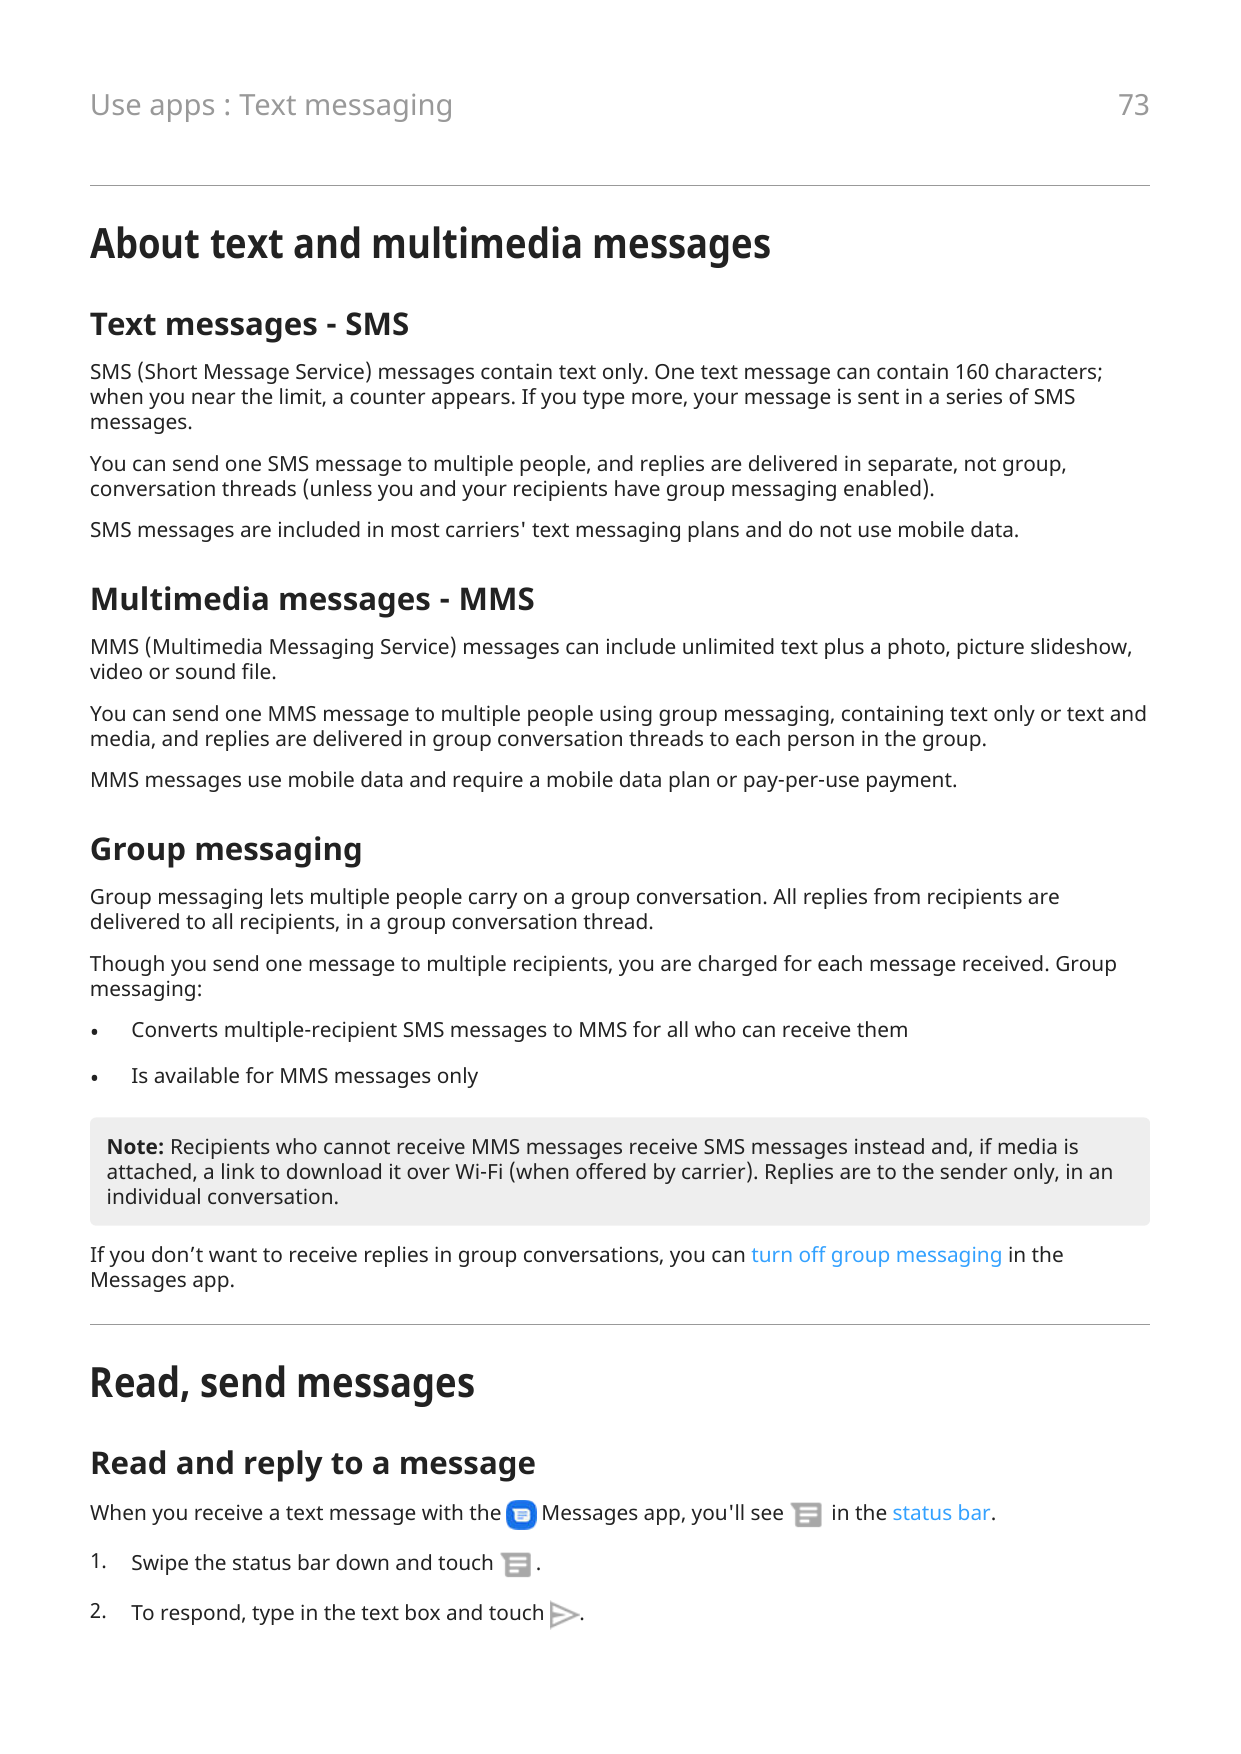 73Use apps : Text messagingAbout text and multimedia messagesText messages - SMSSMS (Short Message Service) messages contain tex